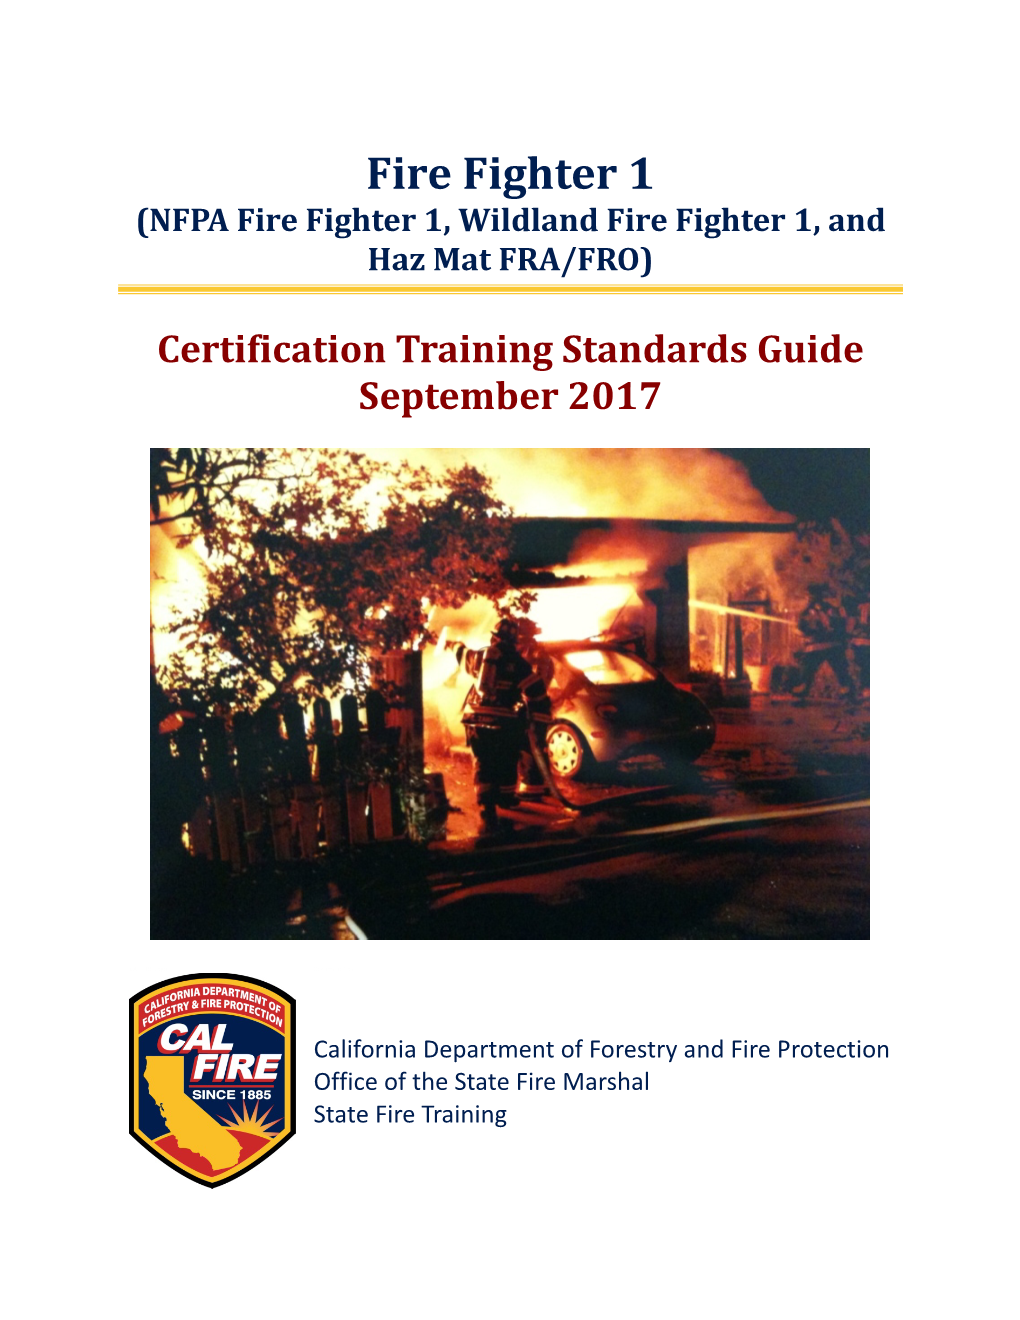 Fire Fighter 1 Certification Training Standards (CTS)